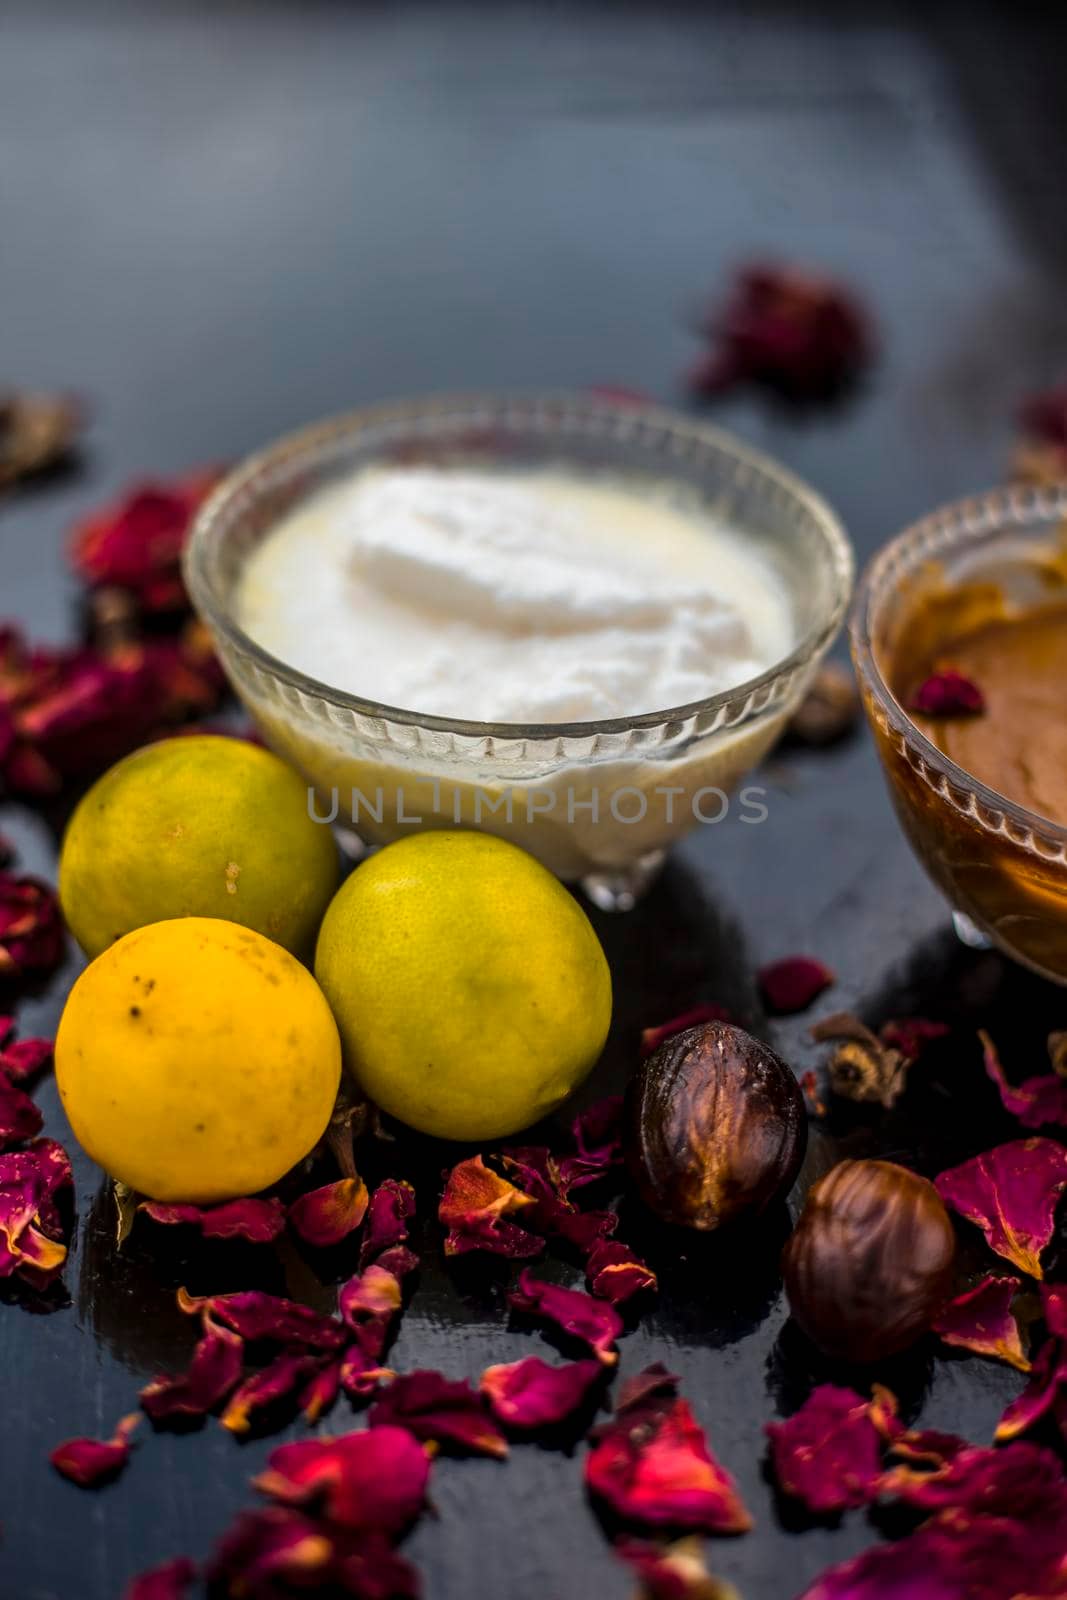 Nutmeg face mask to treat to even out discolorations and pigmentation on your face on the wooden surface consisting of Nutmeg powder, lemon juice, and curd. by mirzamlk